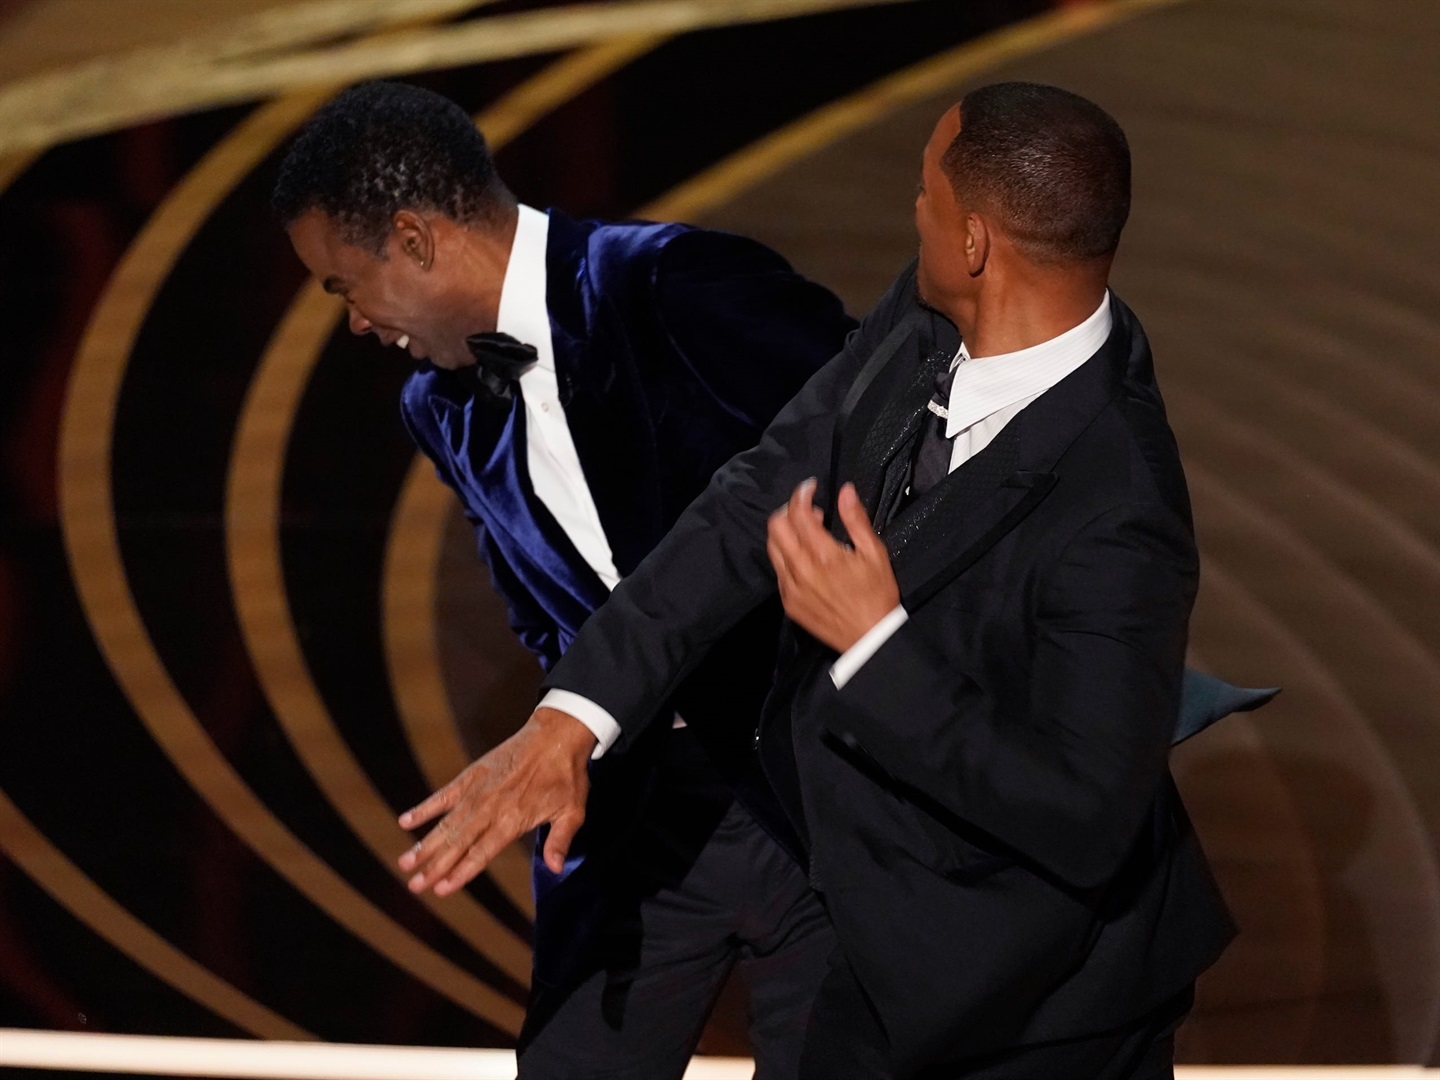 Will Smith has been banned following him slapping Chris Rock.